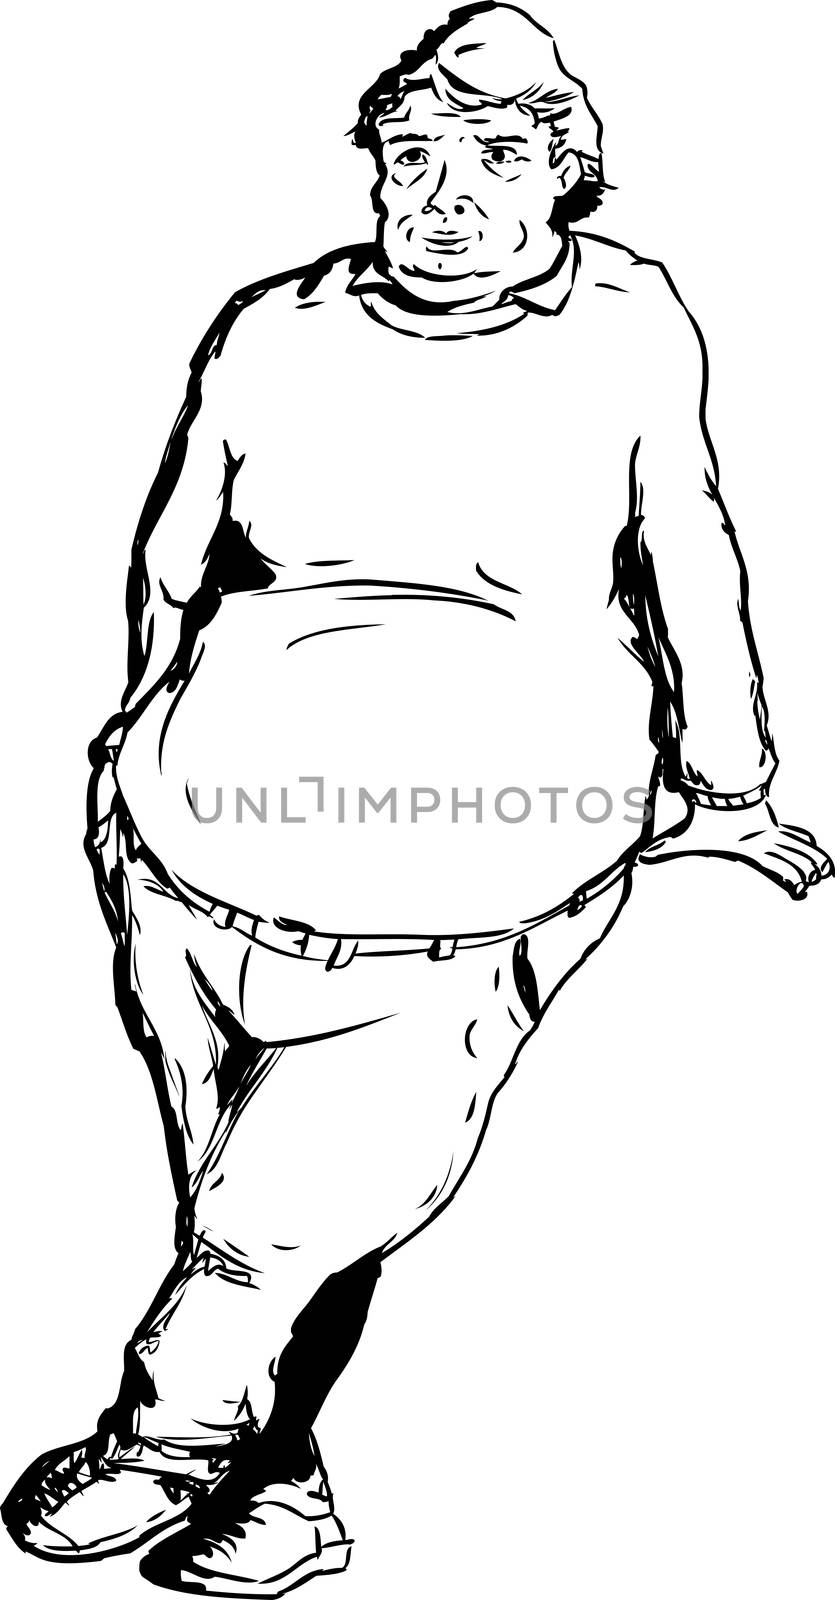 One mature overweight man with big belly and serious expression leaning over blank area 